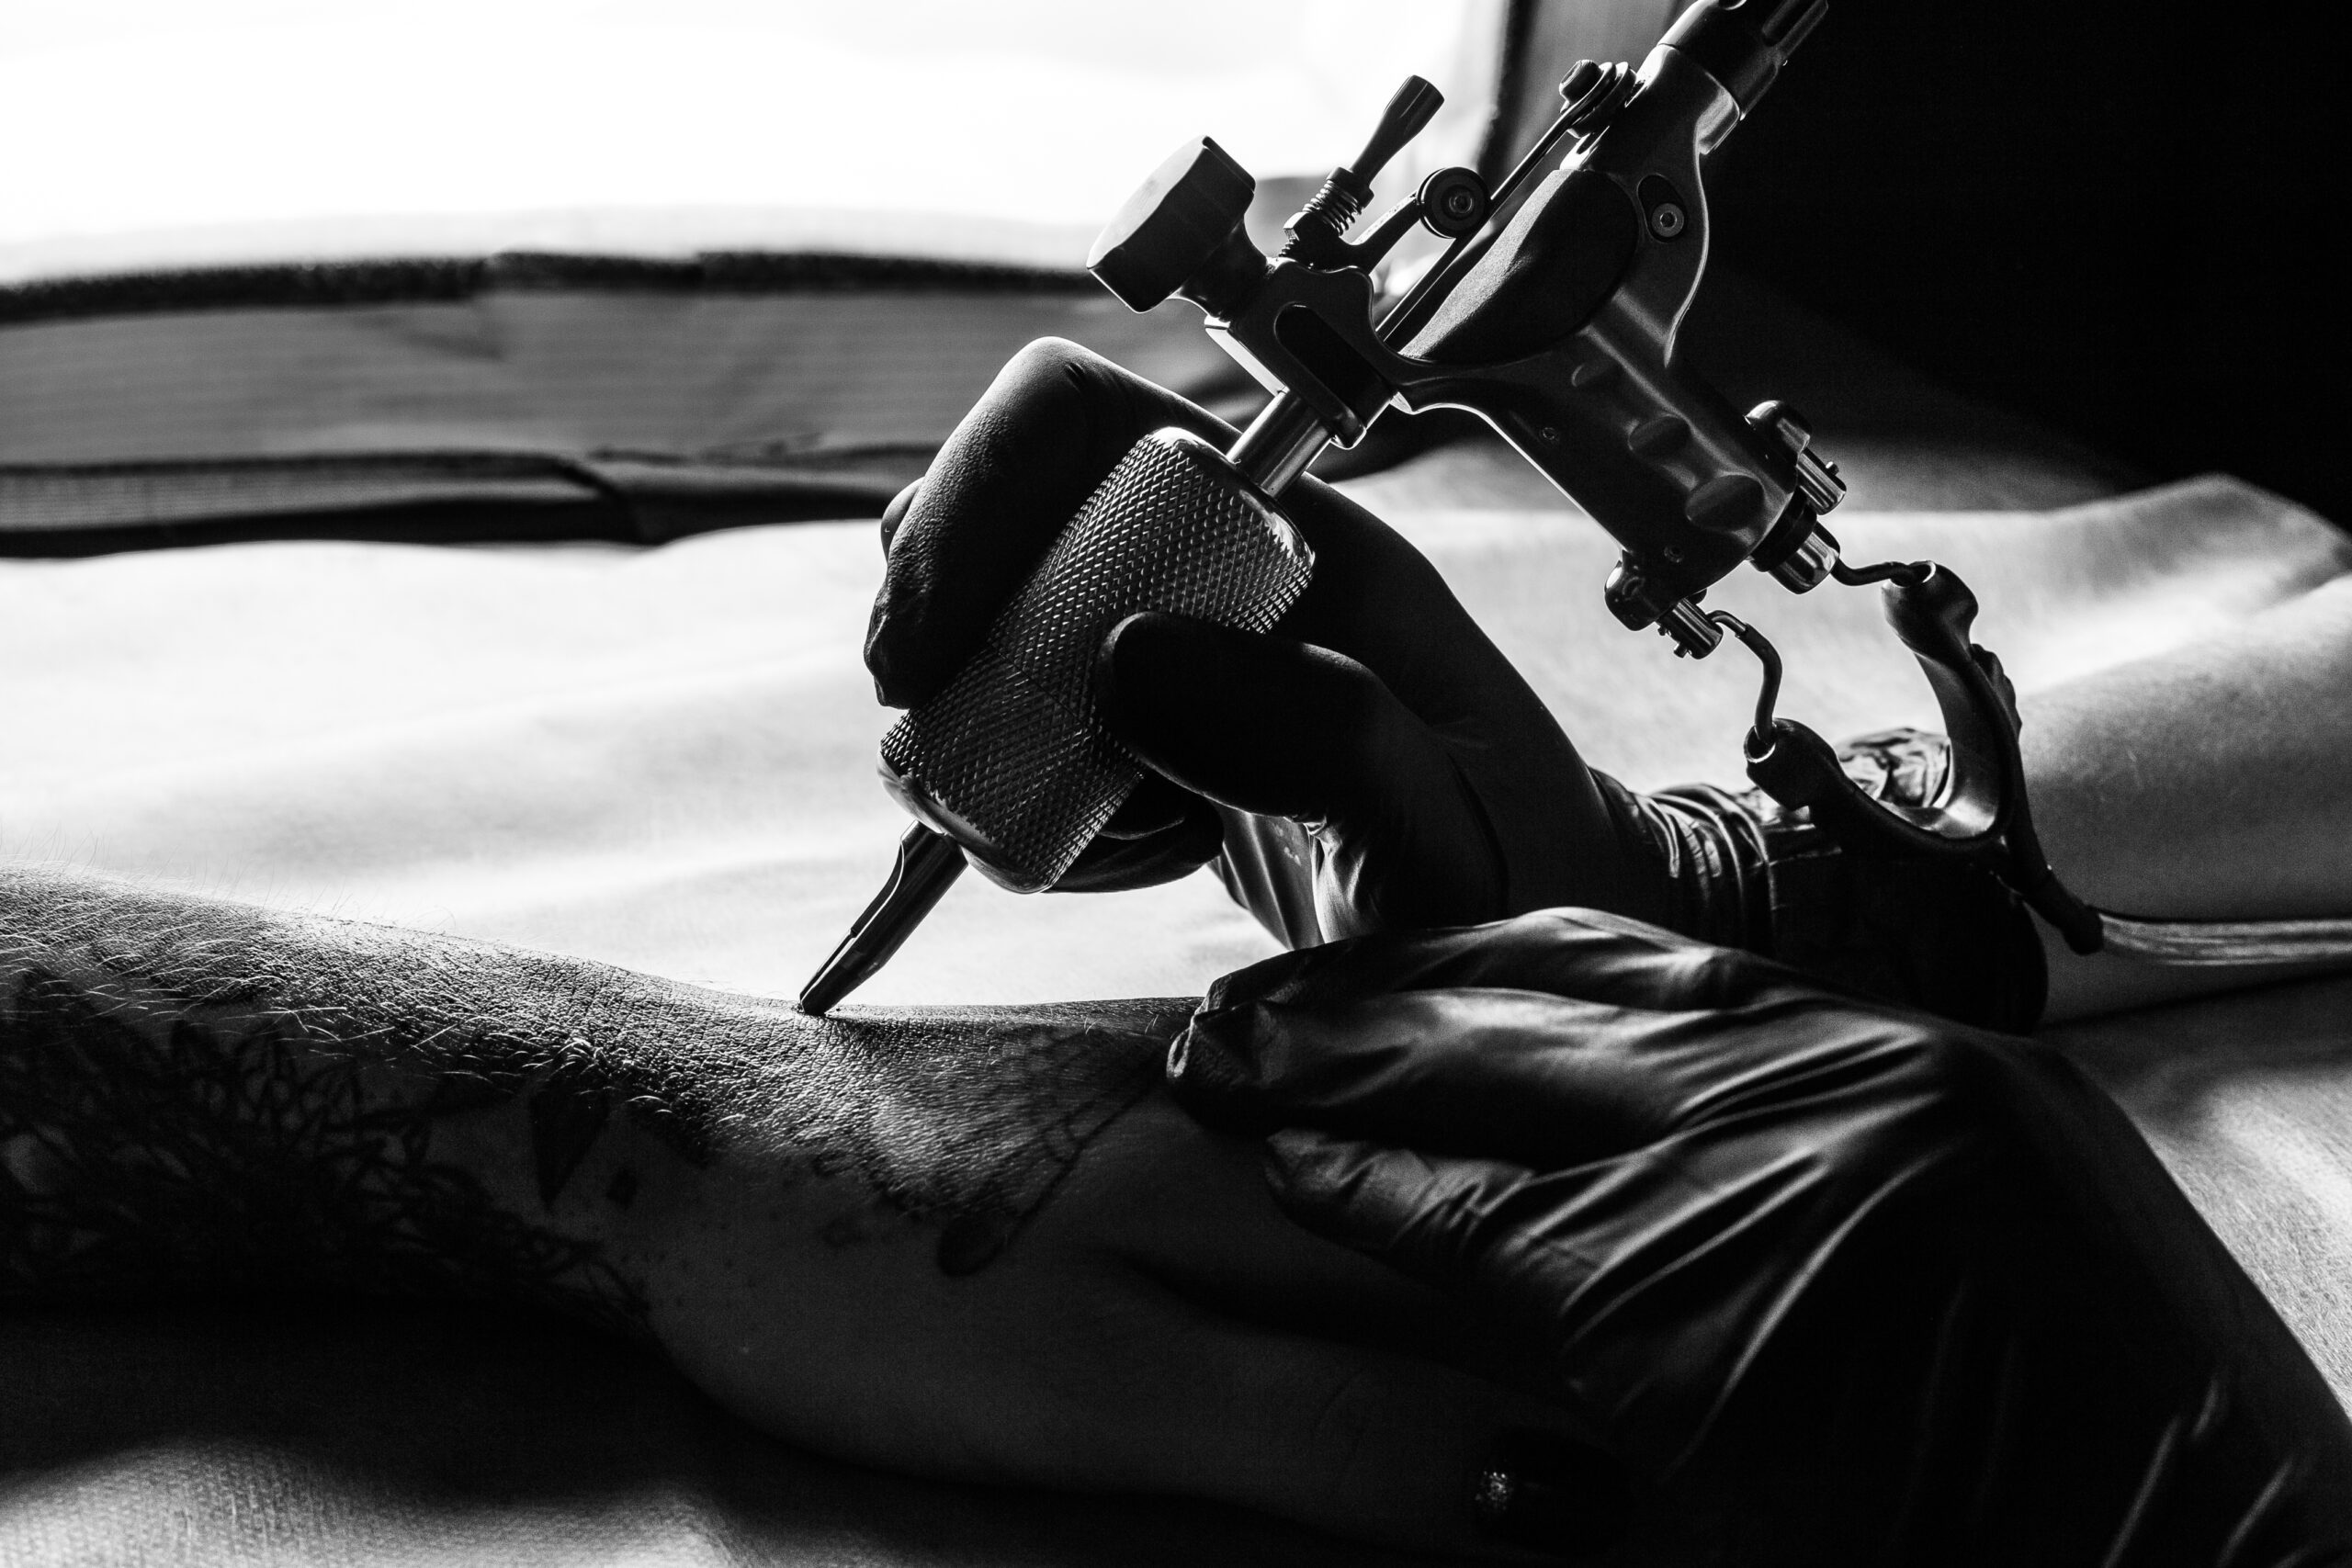 Close up picture of tattooist make a tattoo on clients arm in bw. Master works on the desk in black sterile gloves and hold a tattoo machine.